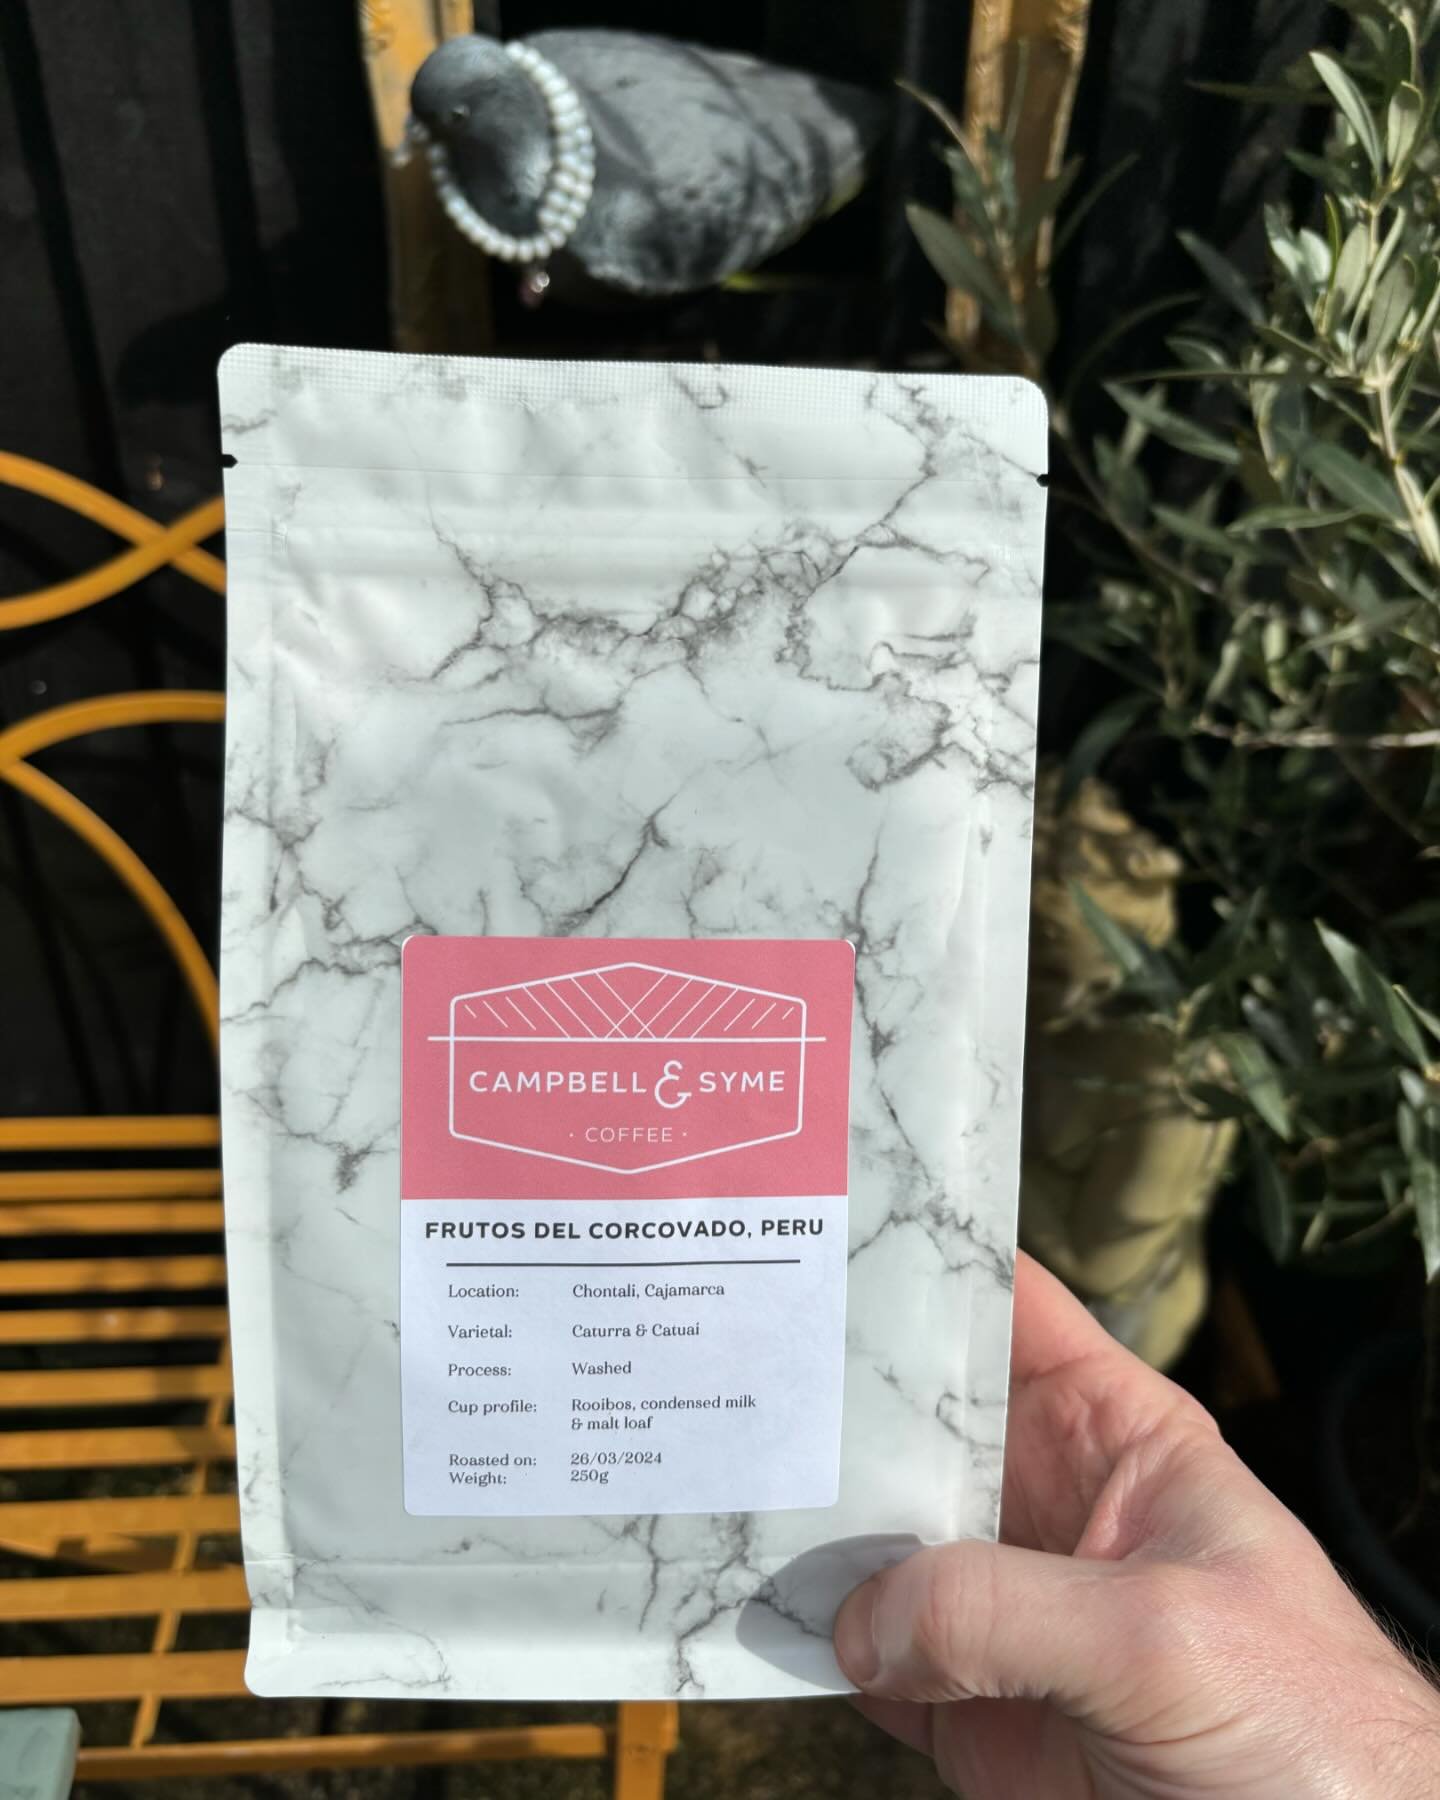 NEW COFFEE -Frutos del Corcovado, Peru (Washed) @campbellandsyme 

While coffees from Peru have been increasingly brilliant the last few years, this has been one of my favourite (non-Geisha) Peruvian coffees I&rsquo;ve had. Brilliantly sweet, vanilla